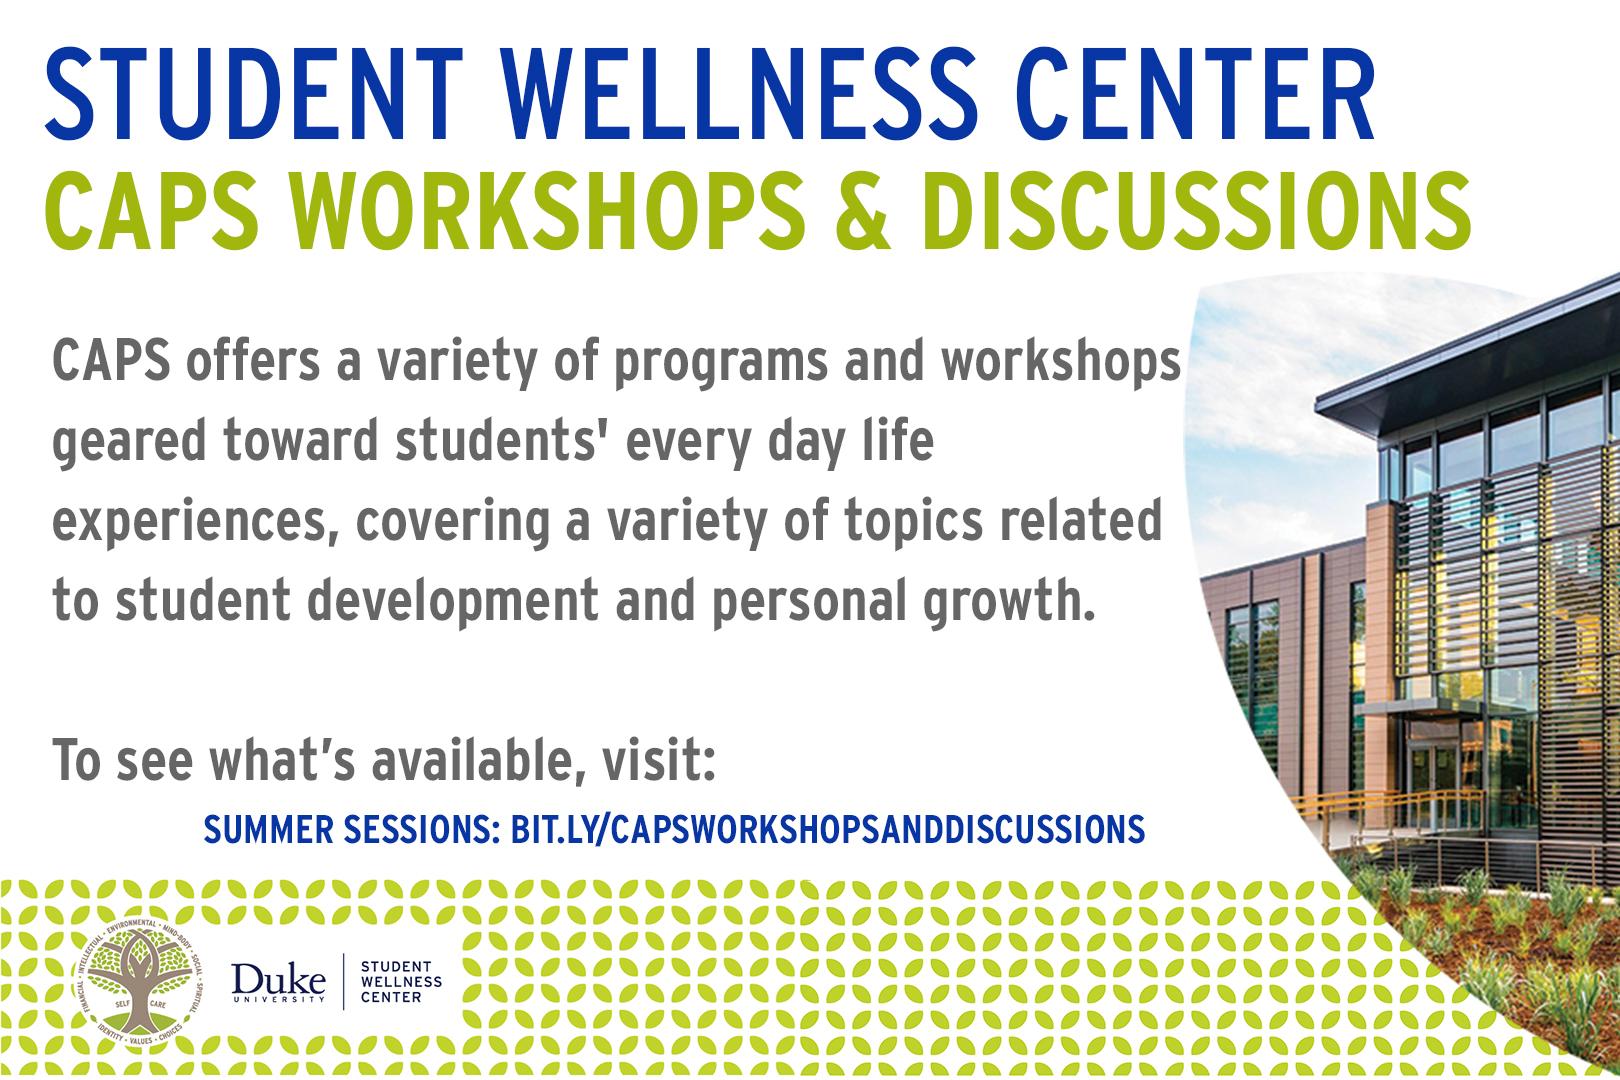 Student Wellness Center CAPS Workshops &amp; Discussions. CAPS offers a variet of programs and workshops geared toward students&#39; every day life experiences, covering a variety of topics related to student development and personal growth. To see what&#39;s available visit: summer sessions: bit.ly/capsworkshopsanddiscussions. Picture of student wellness center